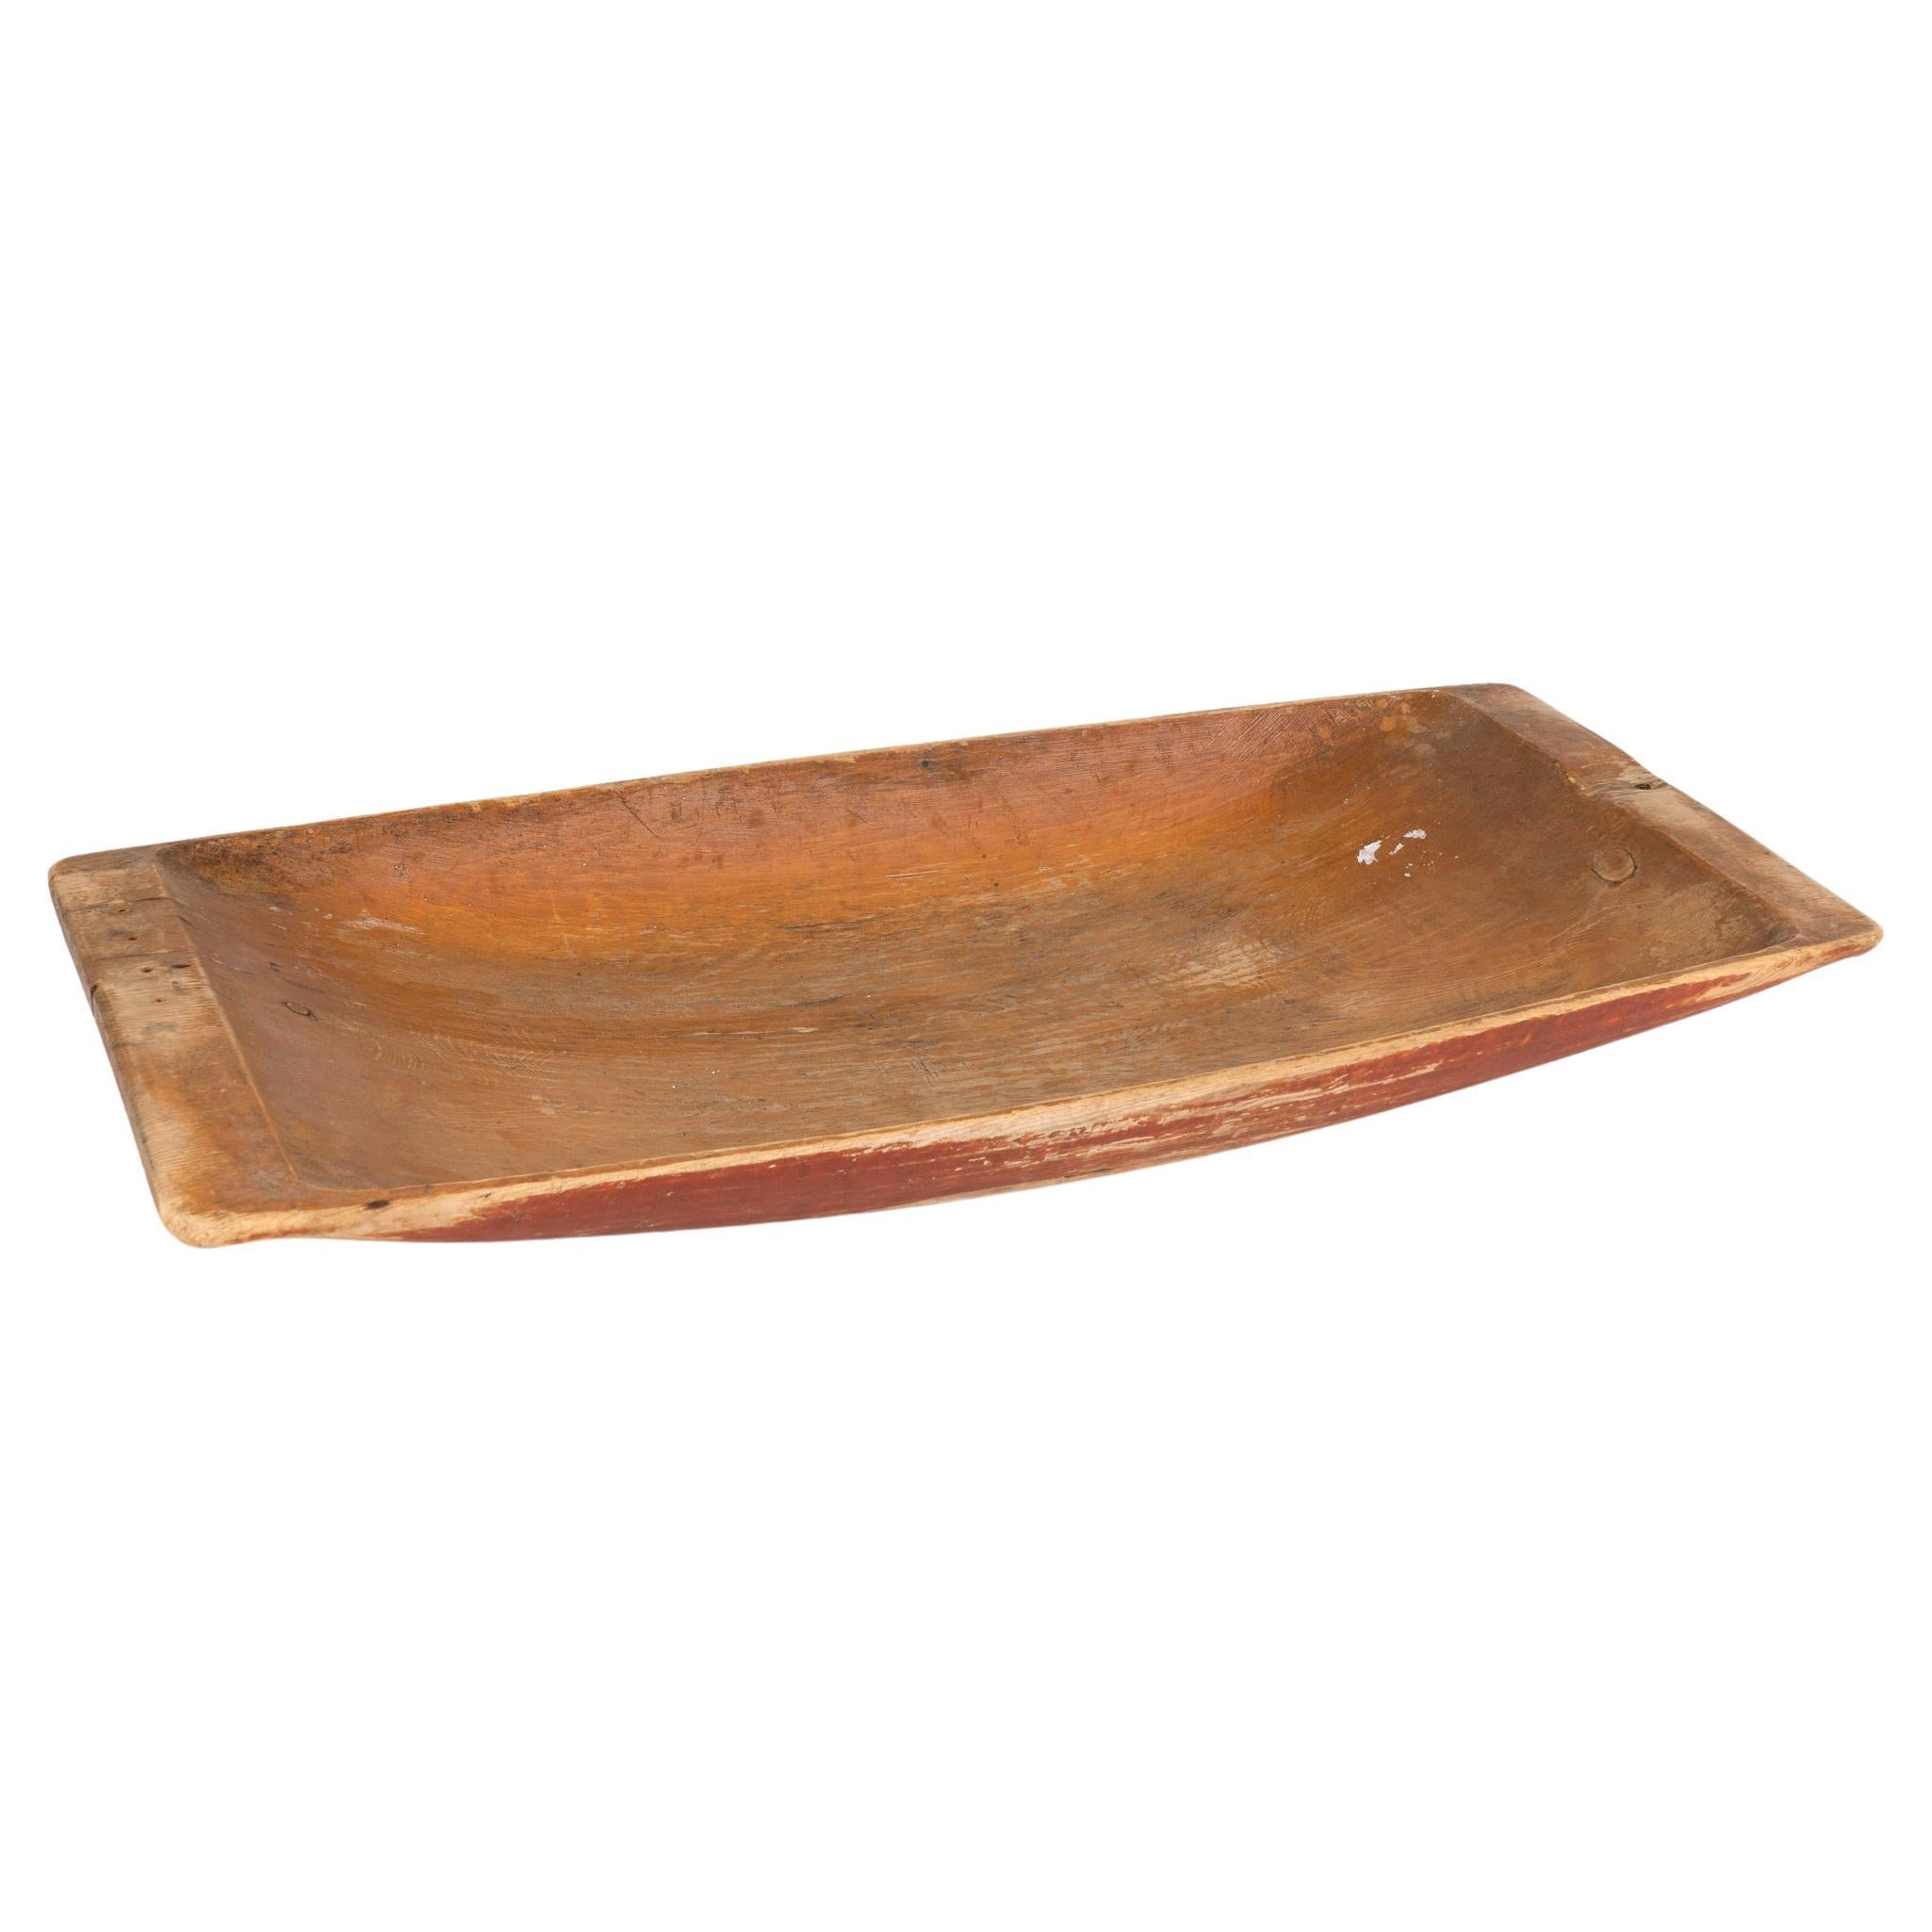 Original Red Painted Swedish Pine Wooden Bowl, circa 1880 For Sale